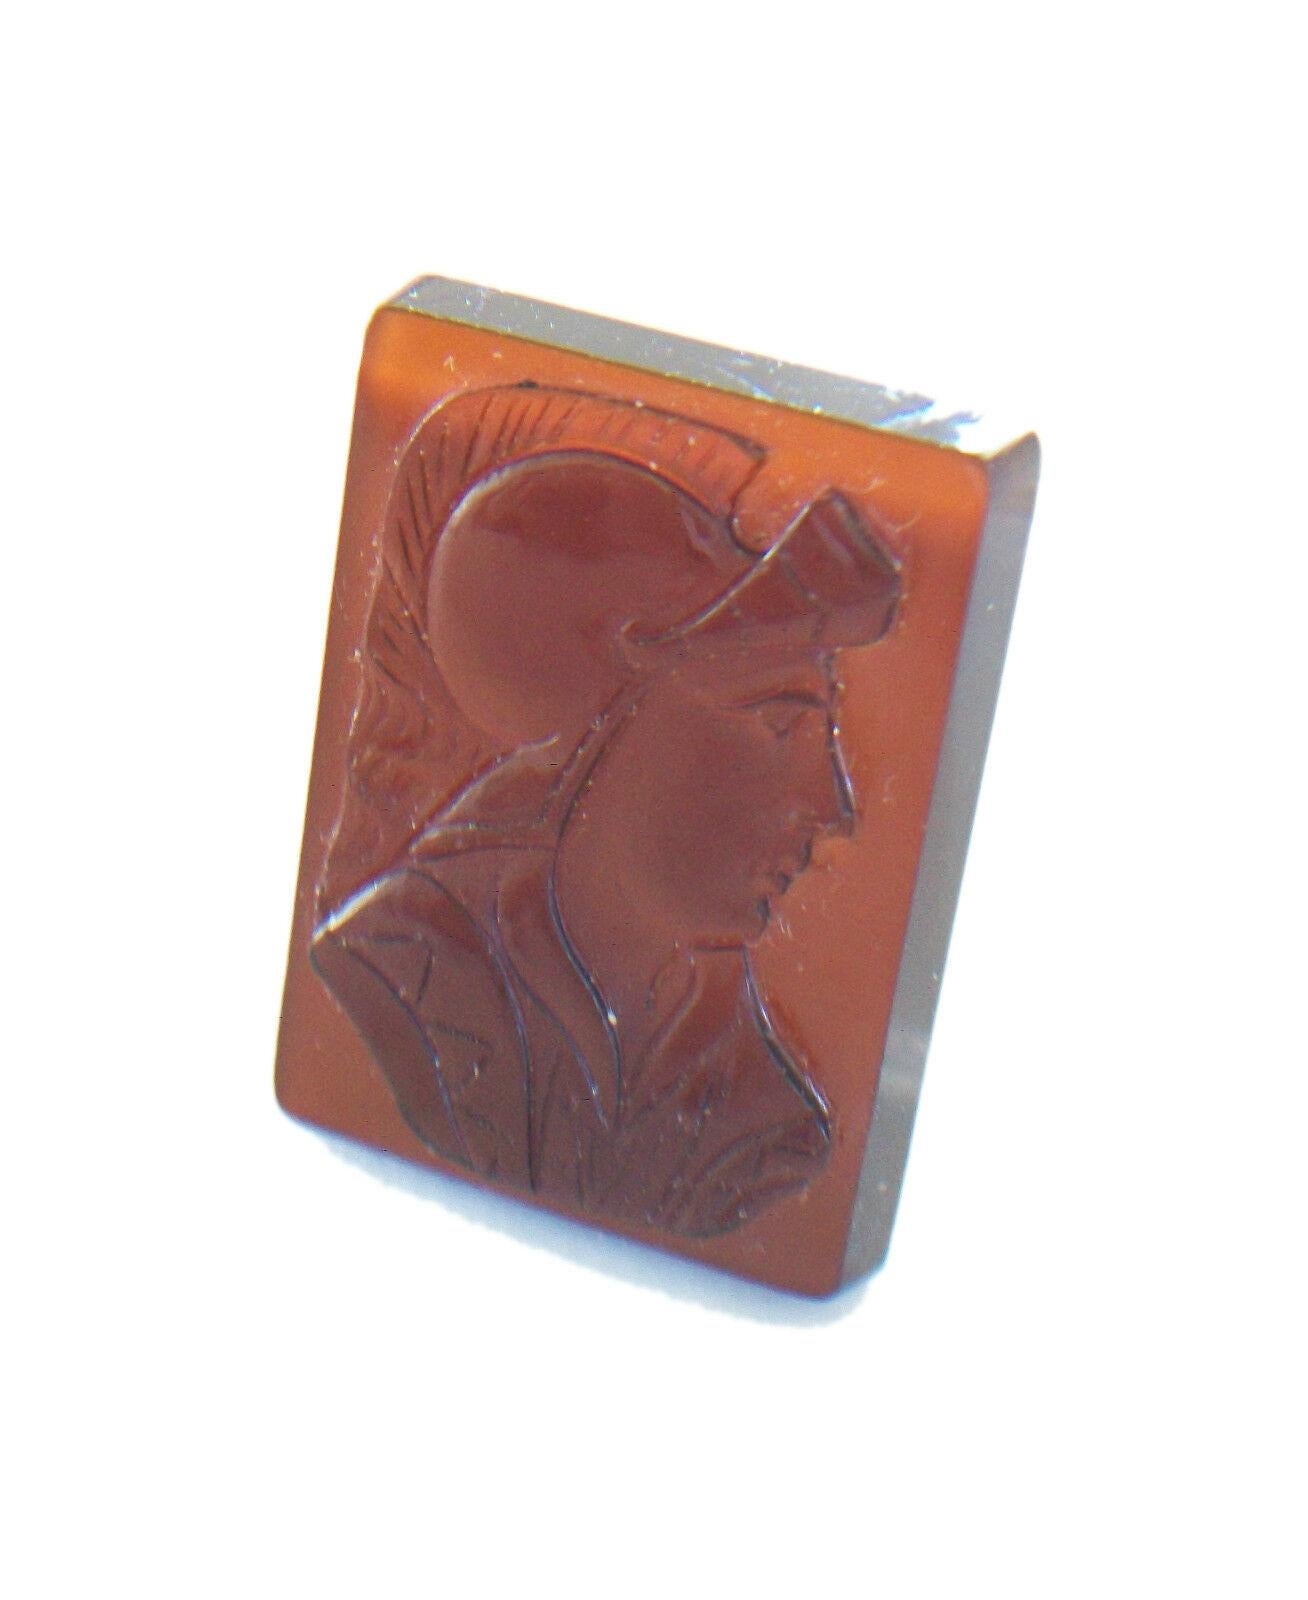 Classical Roman Antique Hardstone Intaglio - Unset Gemstone - Europe - Early 20th Century For Sale